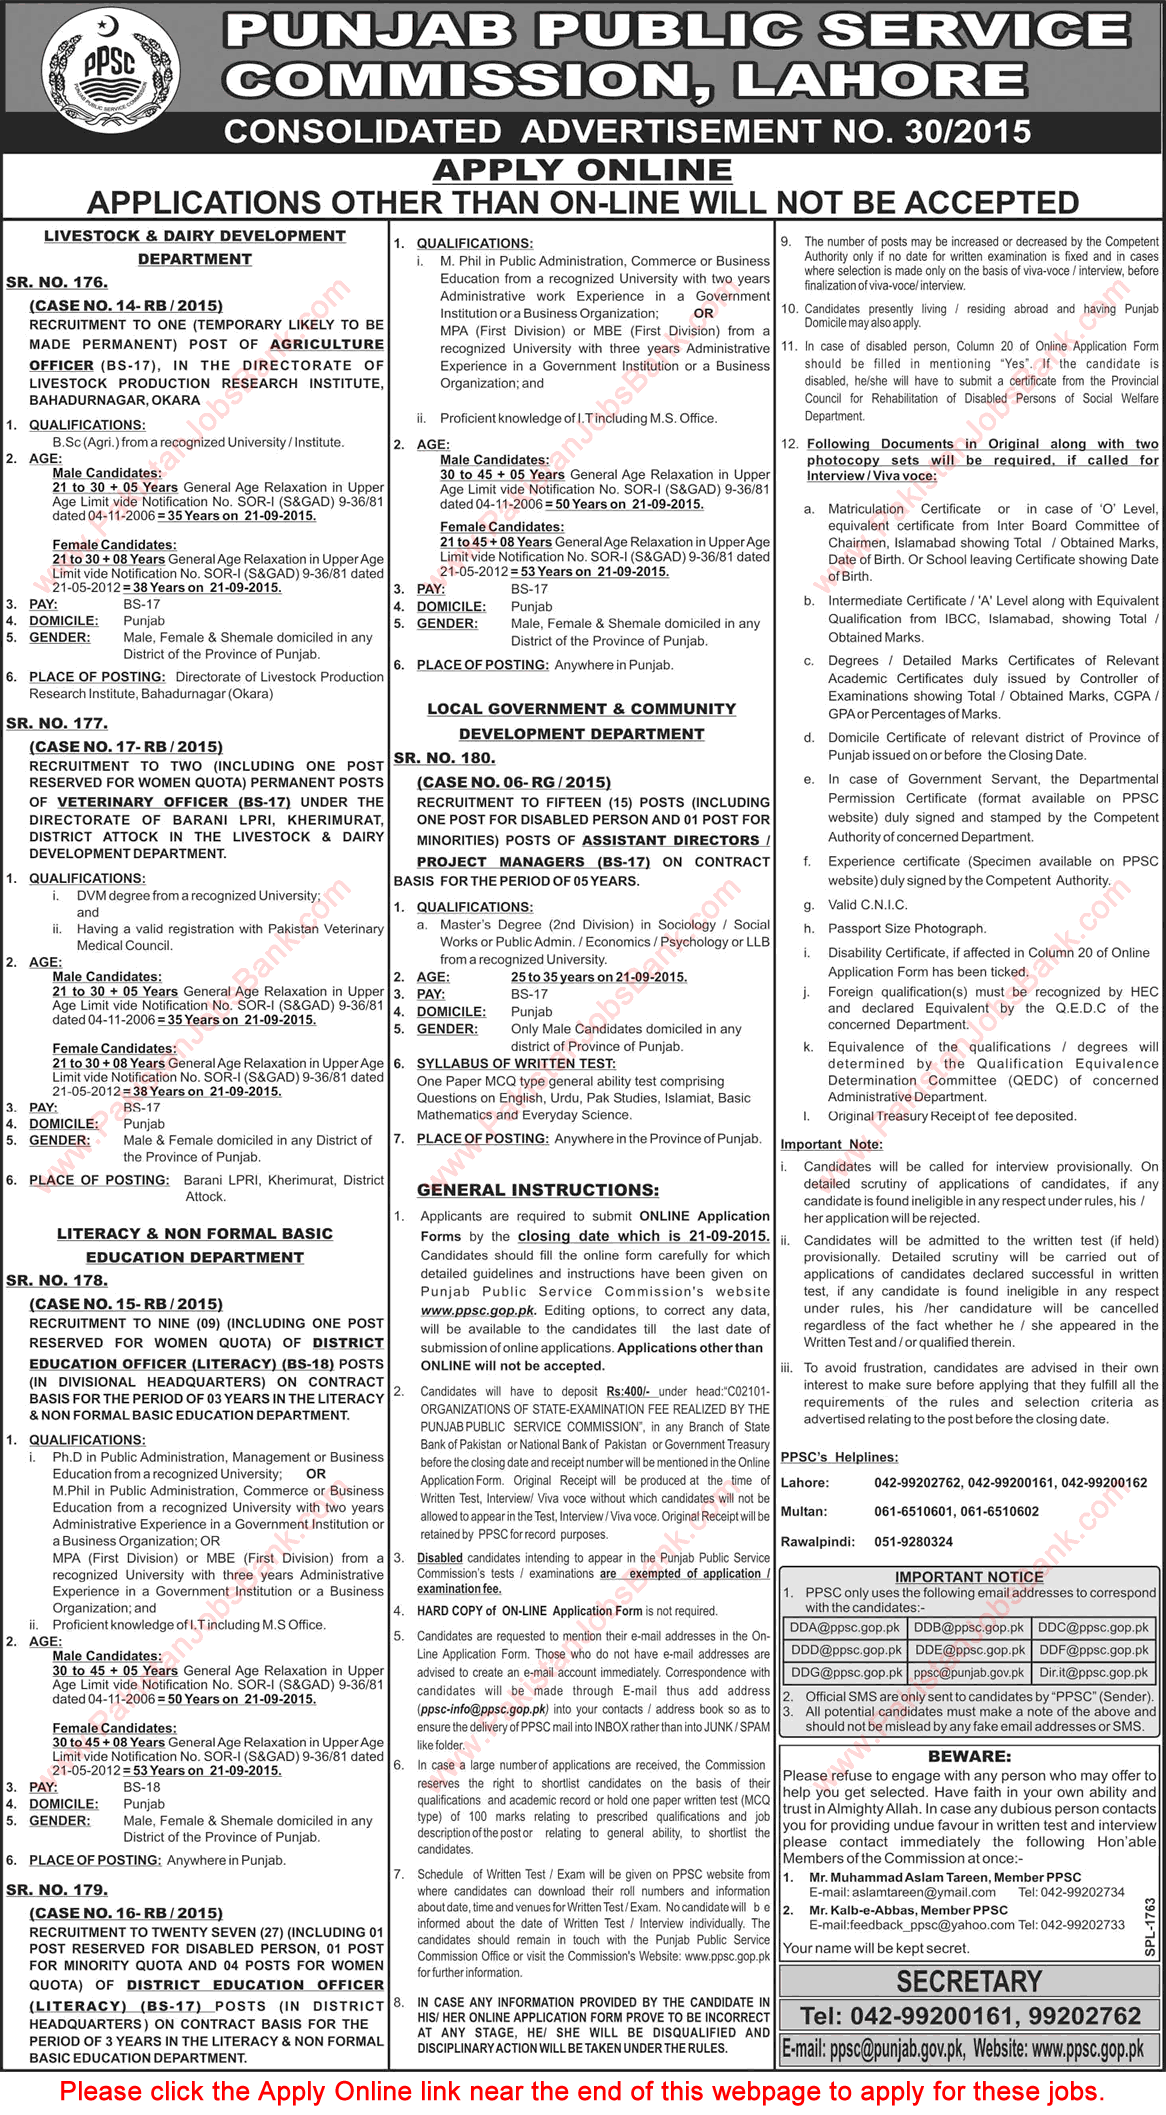 PPSC Jobs September 2015 Consolidated Advertisement No. 30/2015 Online Apply Latest